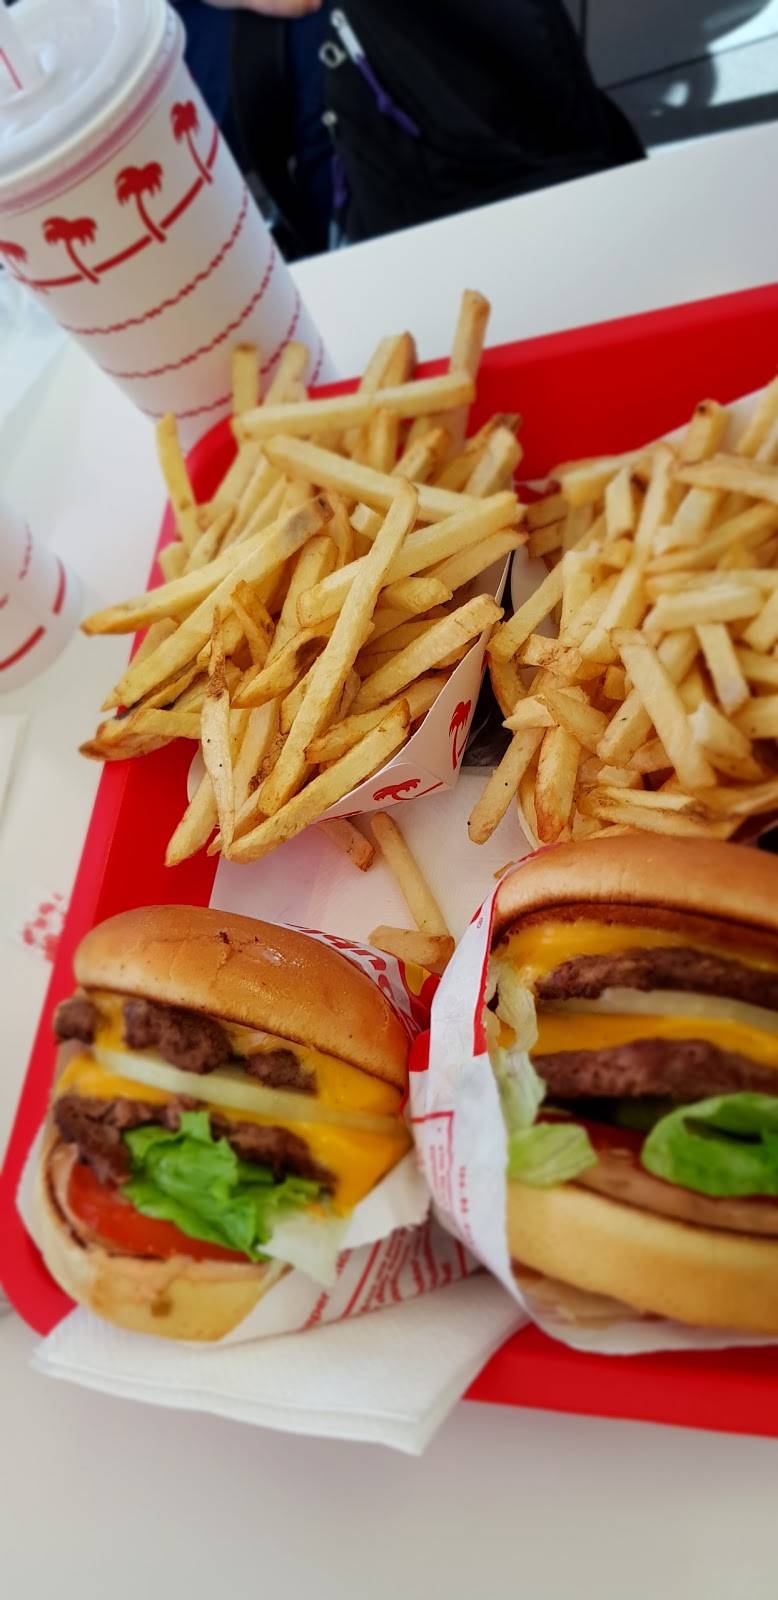 In-N-Out Burger | restaurant | 1616 Sisk Rd, Modesto, CA 95350, USA | 8007861000 OR +1 800-786-1000